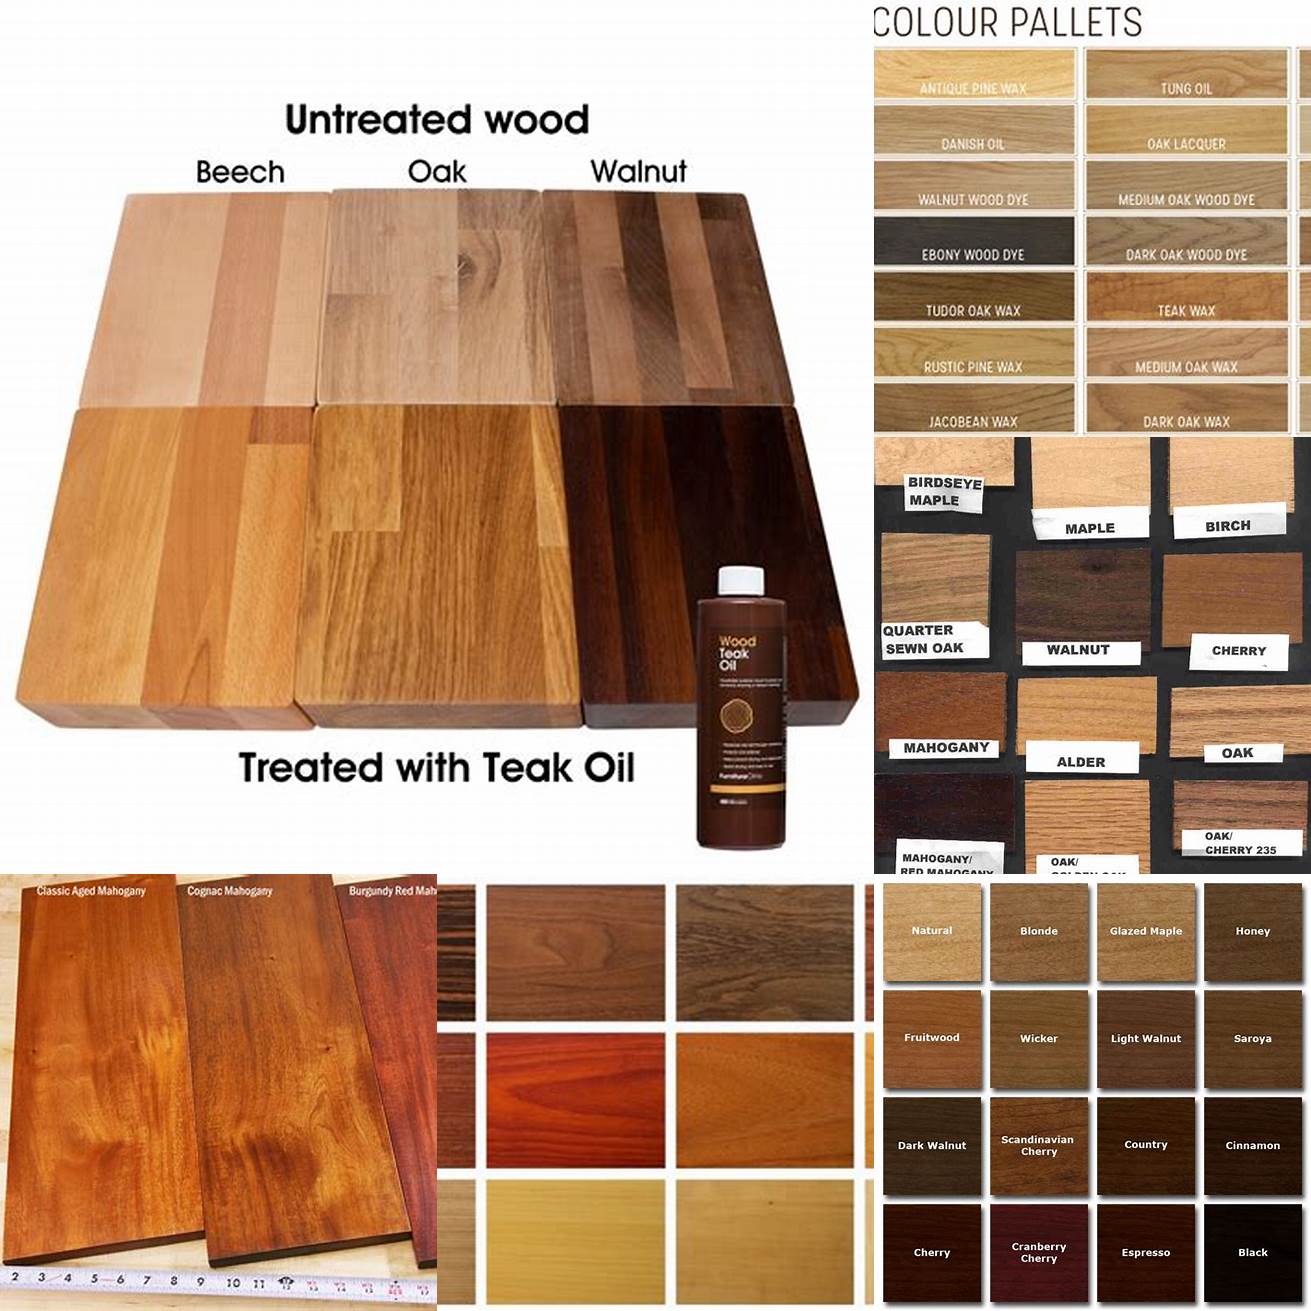 Teak Oil on Different Colors of Wood